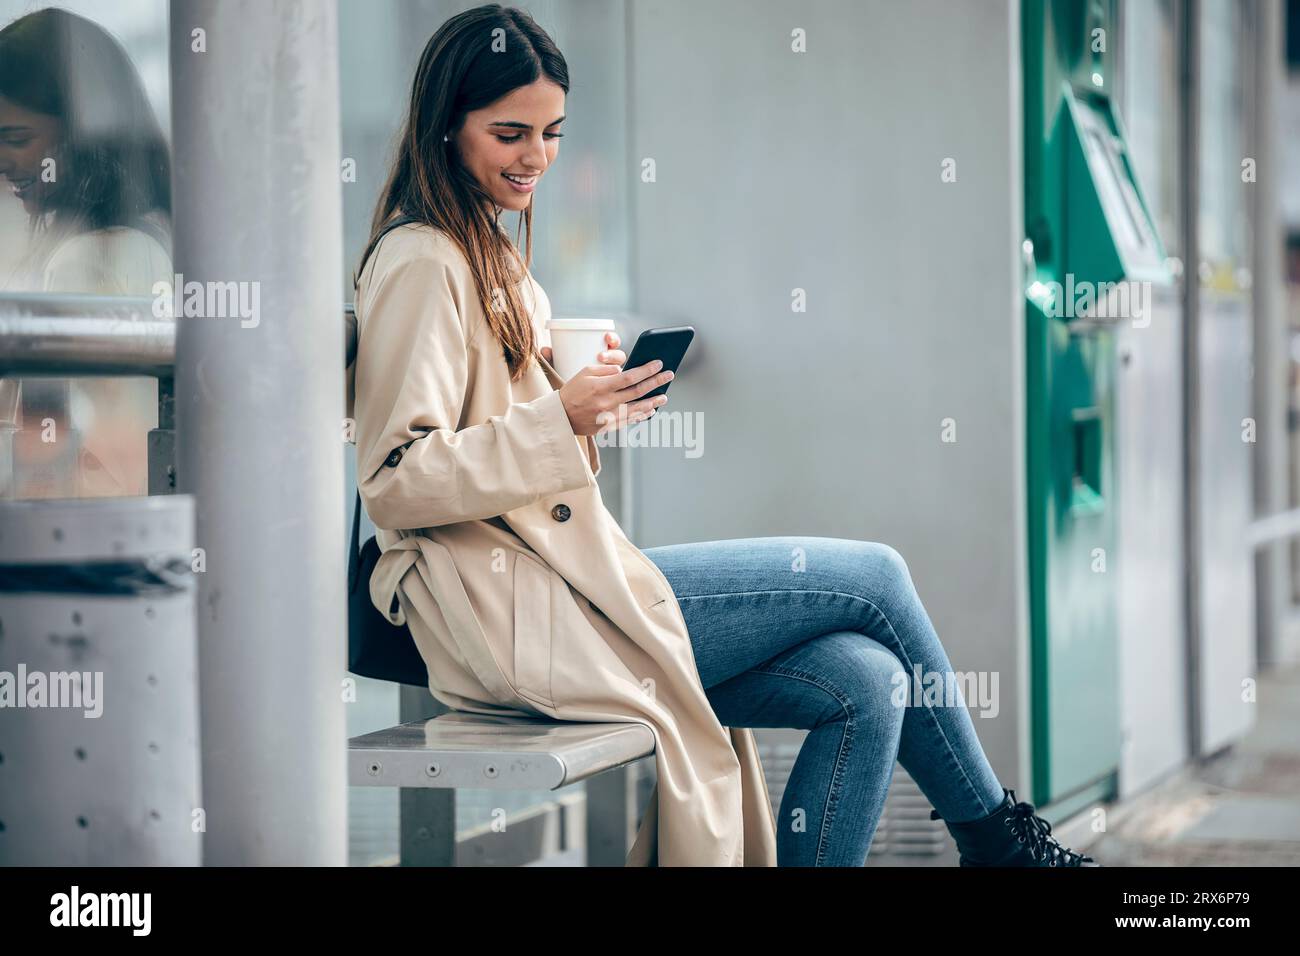 Happy woman sitting on bench and using smart phone Stock Photo